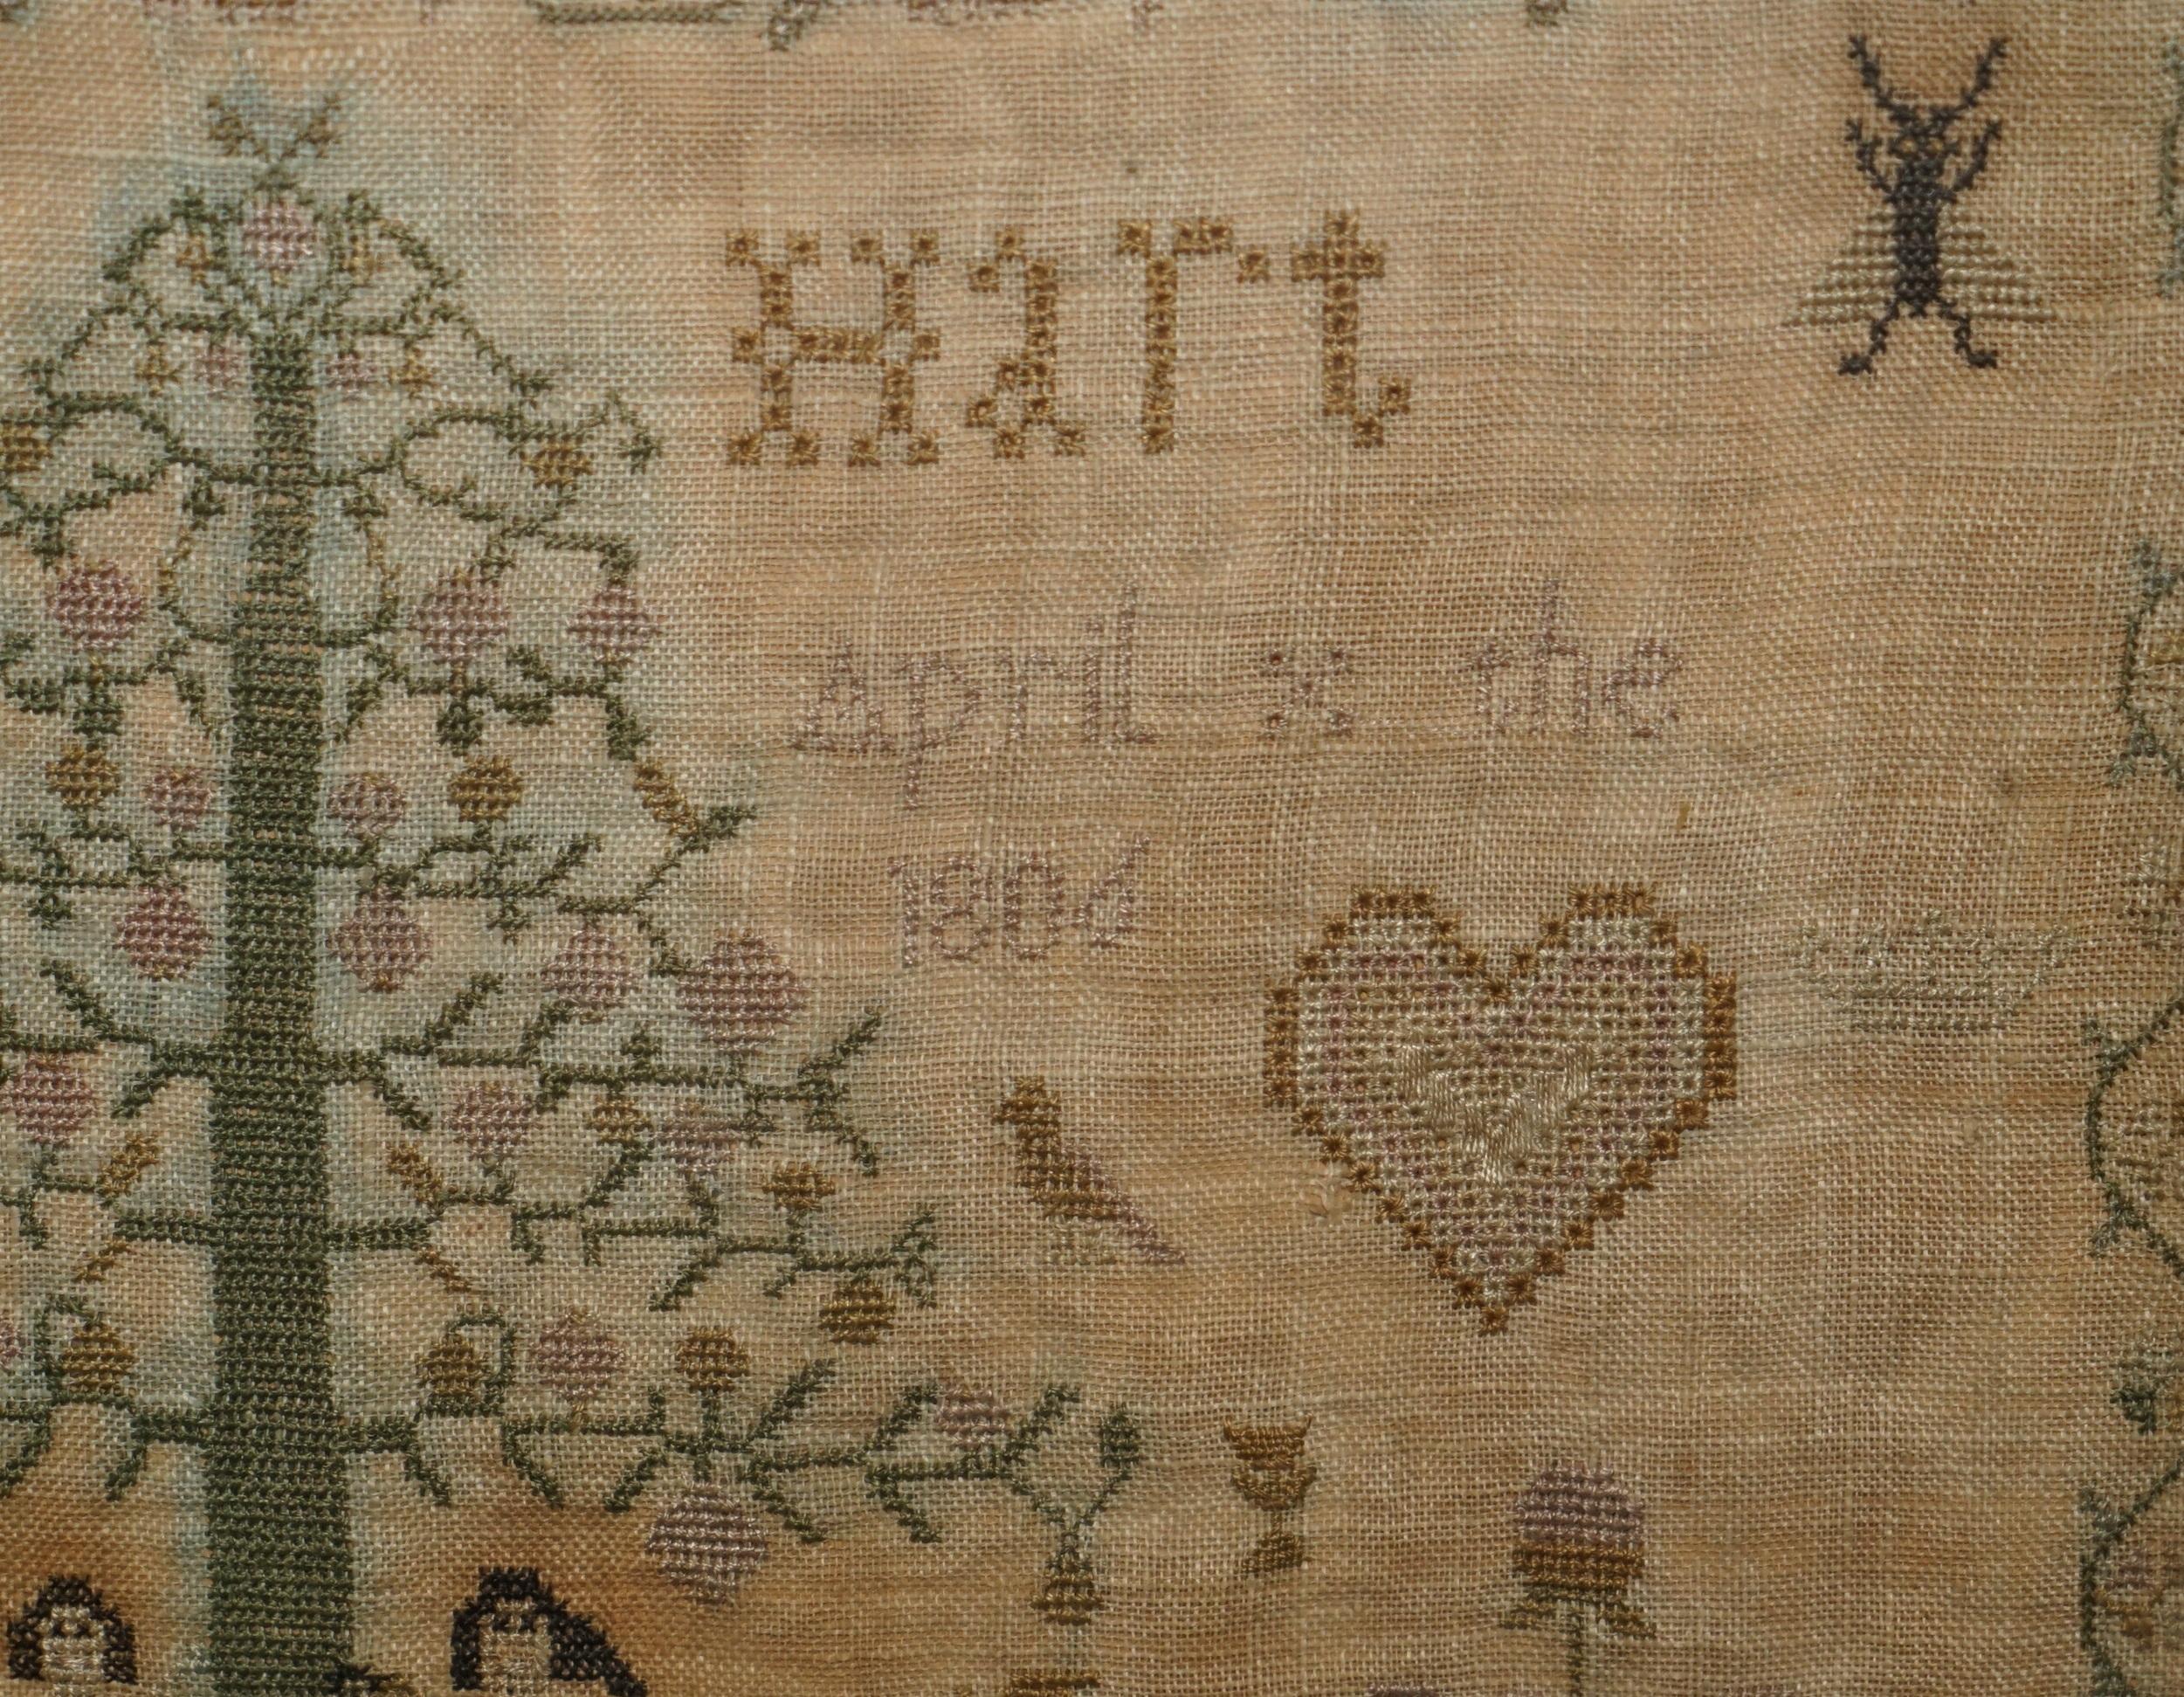 Embroidered ANTIQUE MARY HART SIGNED 1806 GEORGE II NEEDLEWORK SAMPLER WiTH LOVELY POEM For Sale